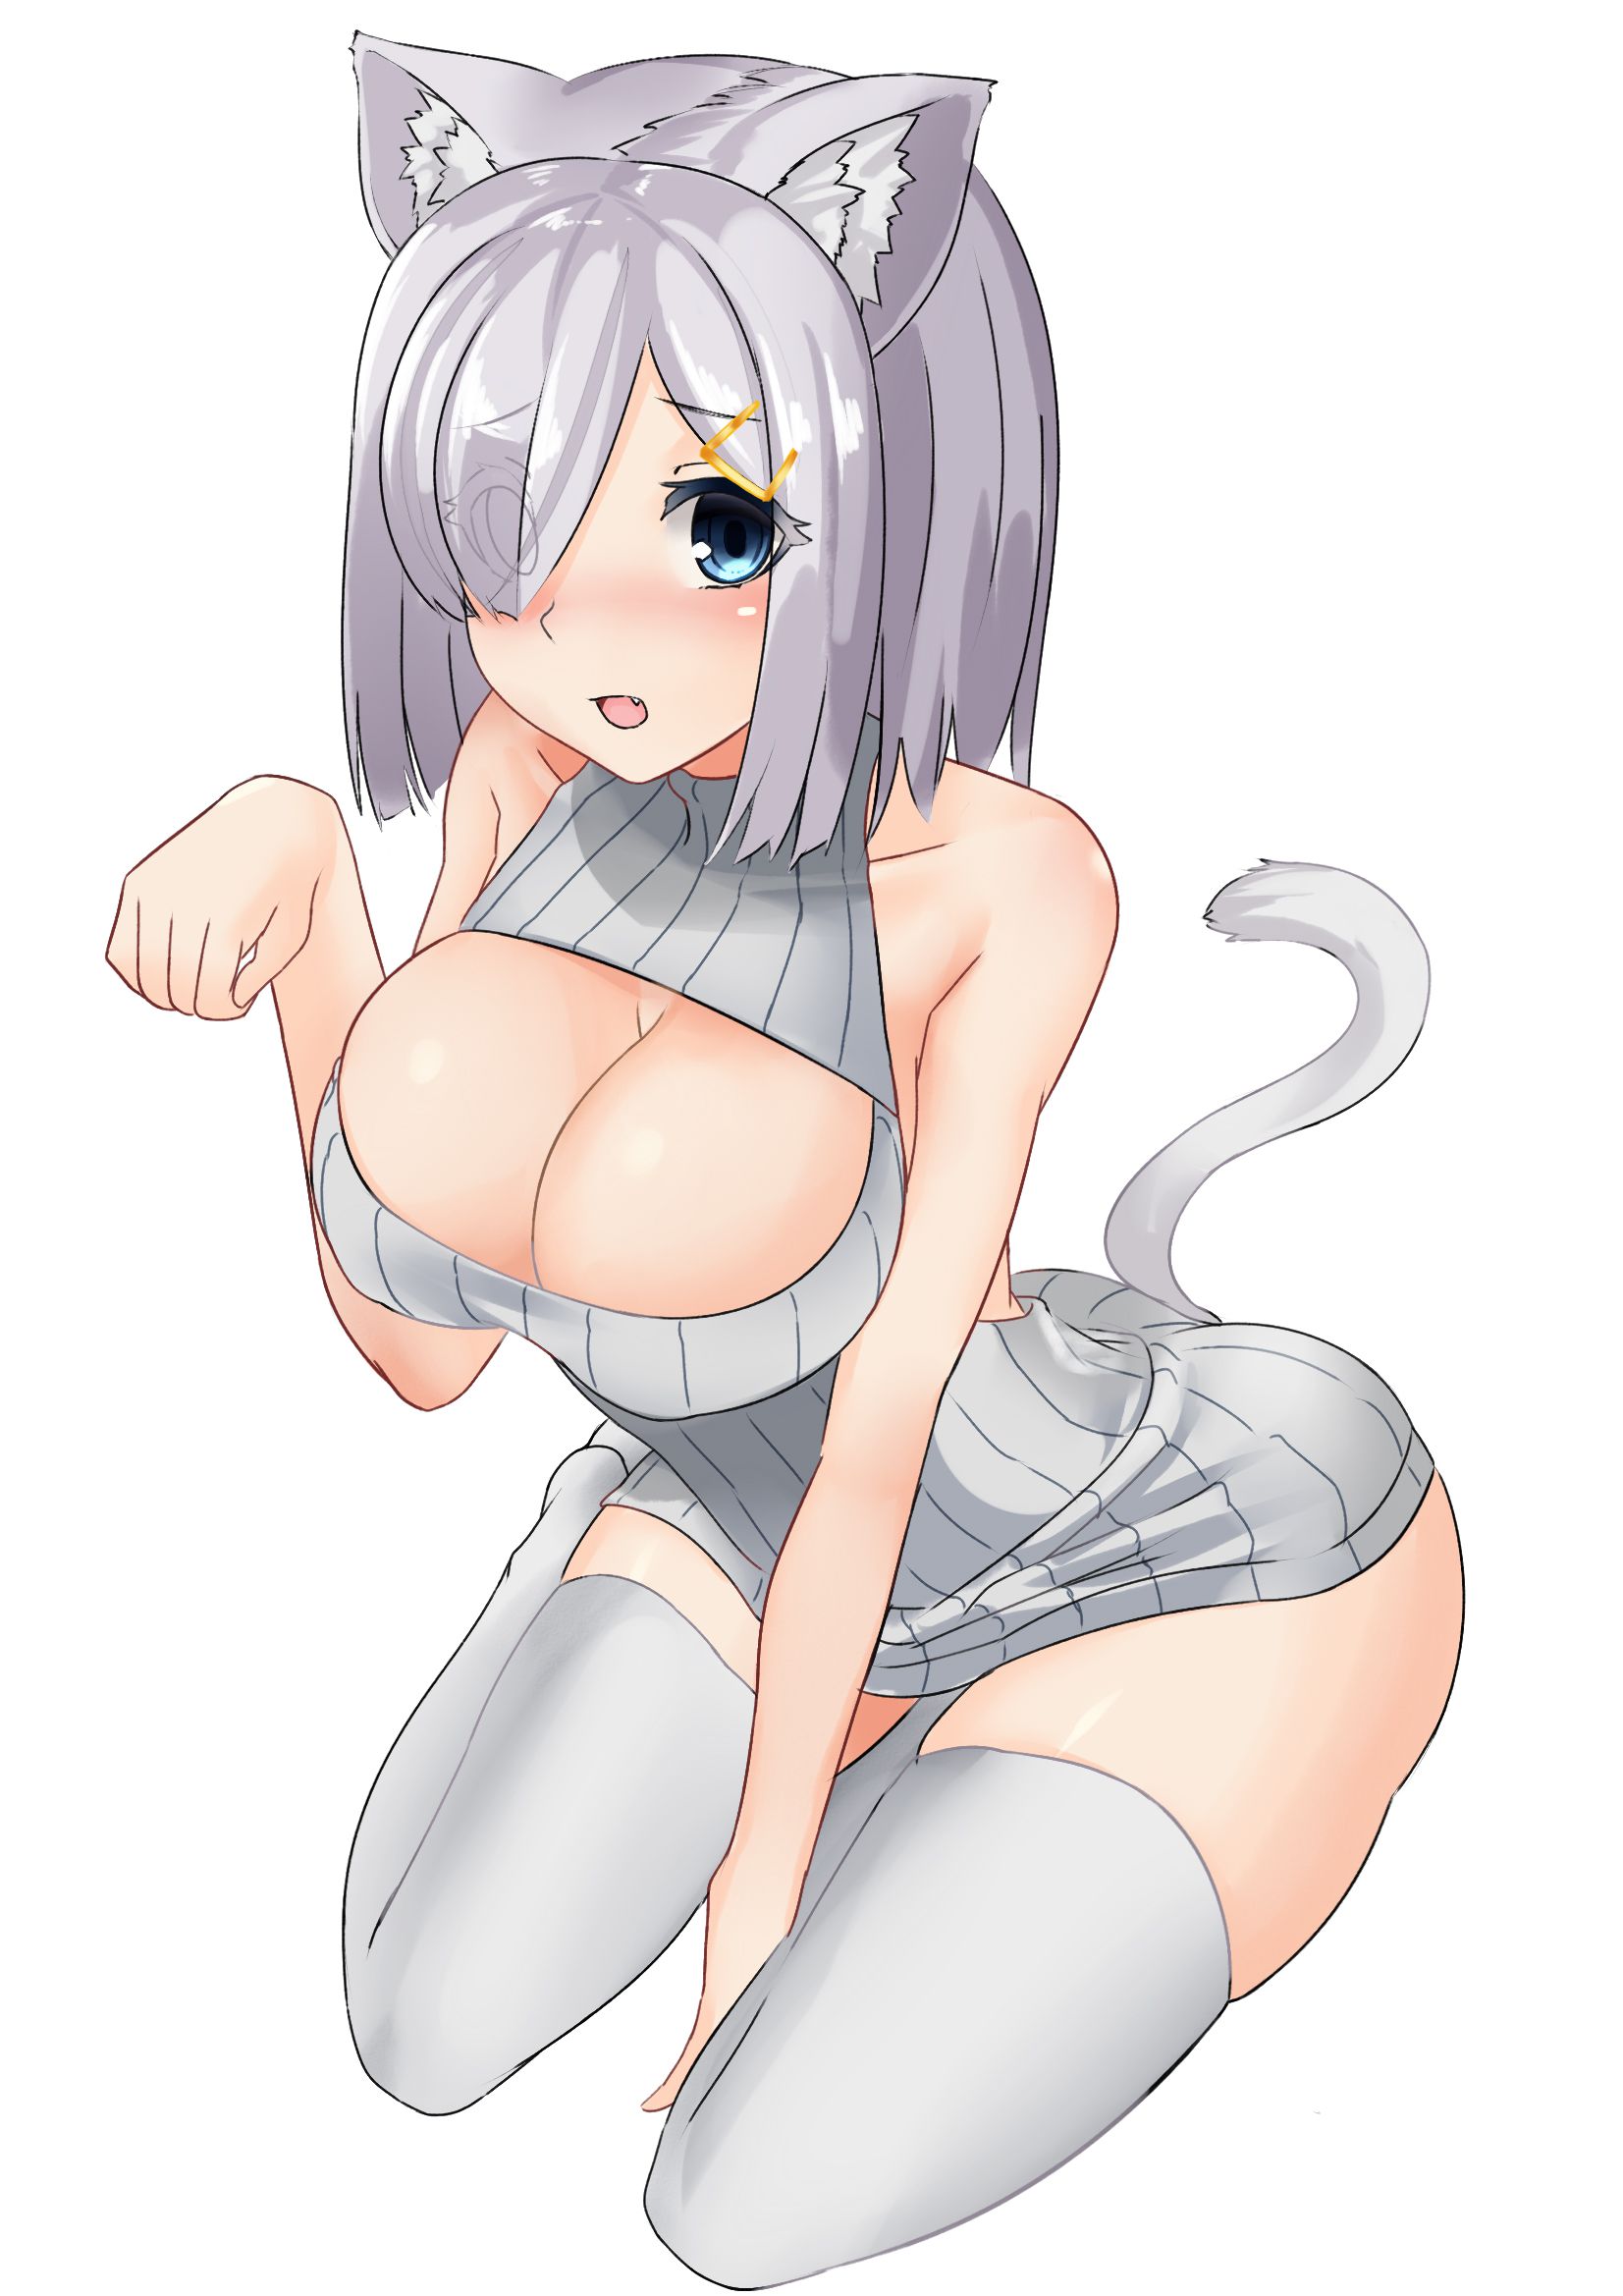 [Ship it] hamakaze erotic pictures so this overwhelming cuteness! 19